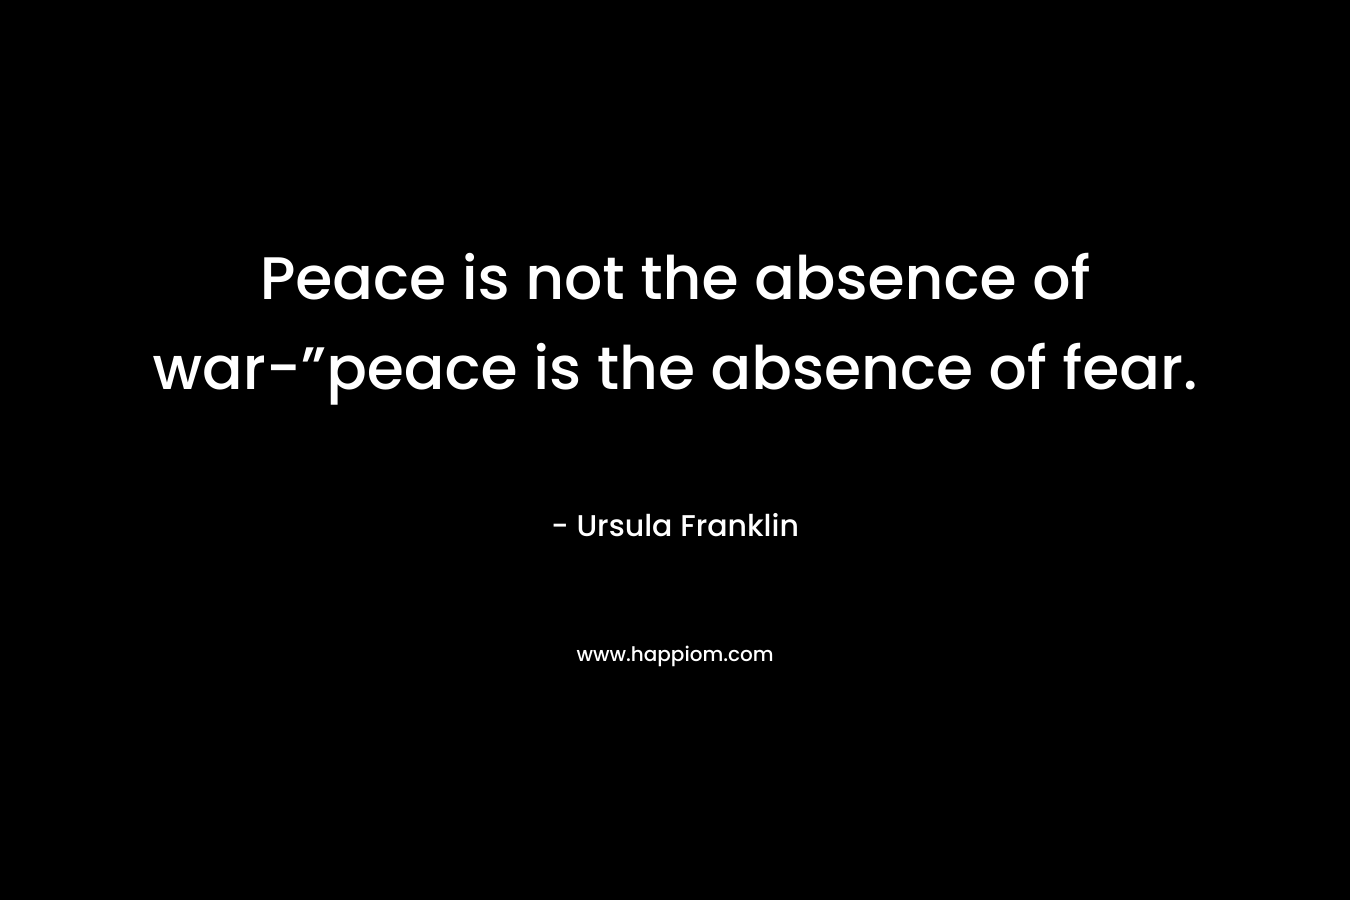 Peace is not the absence of war-”peace is the absence of fear.